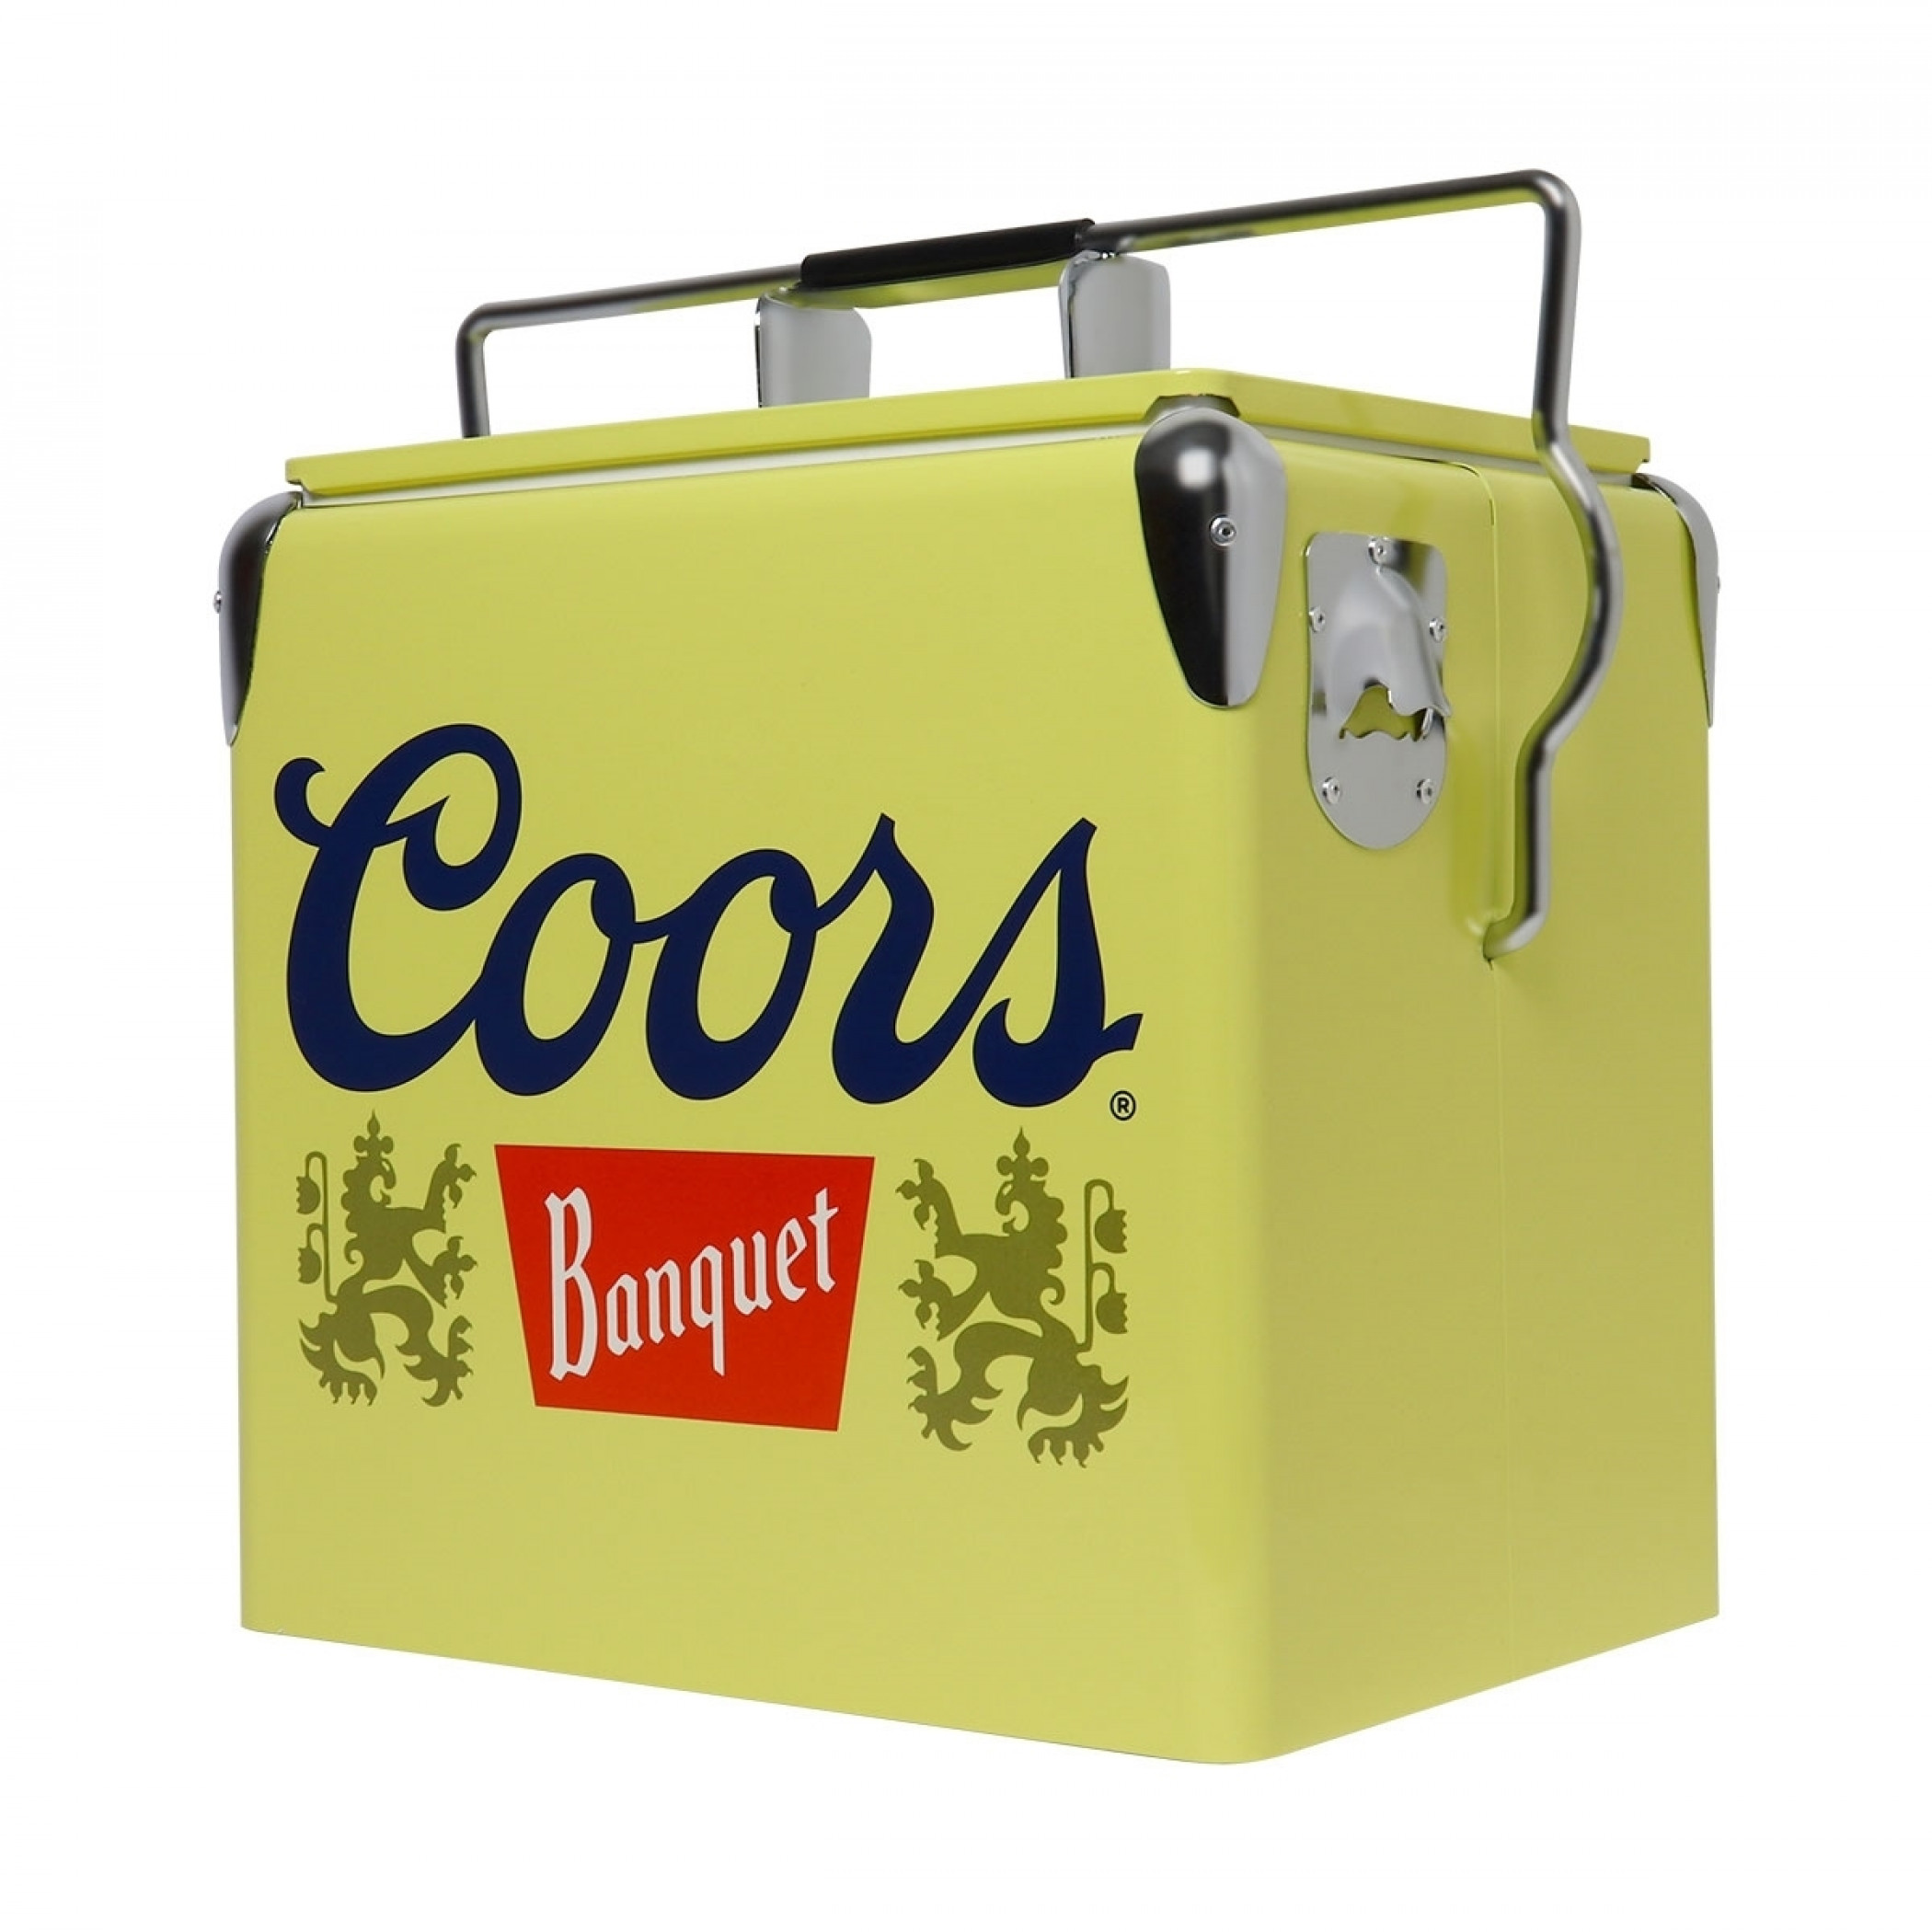 Coors Light® 13L Retro Ice Chest Cooler with Bottle Opener